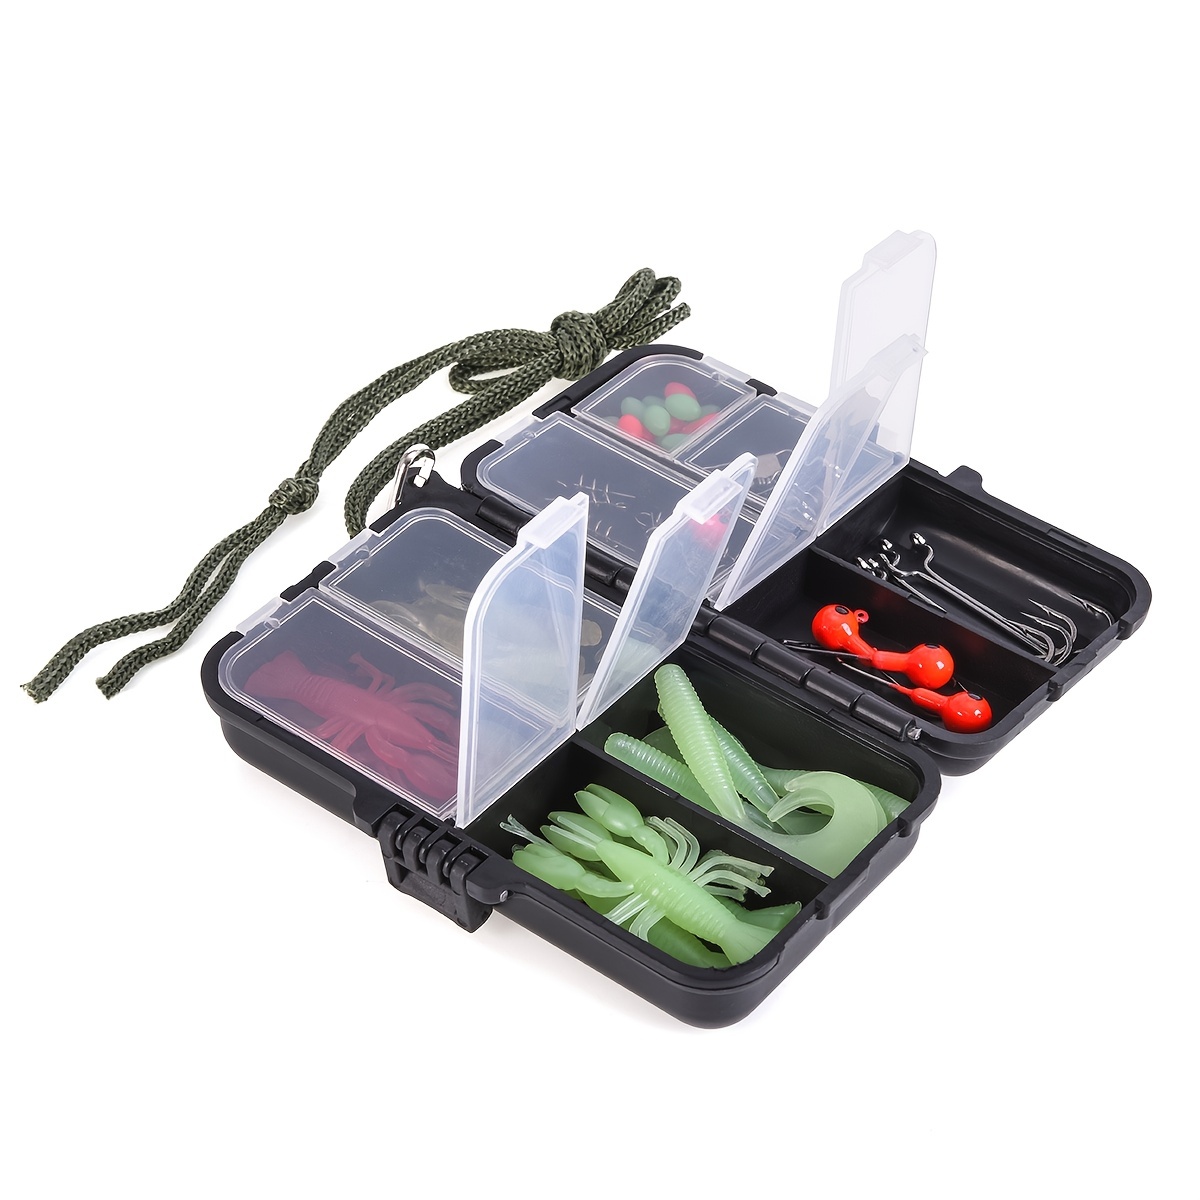 Classic Fishing Gear Set - Tackle Box with Reel, Bait, Lures